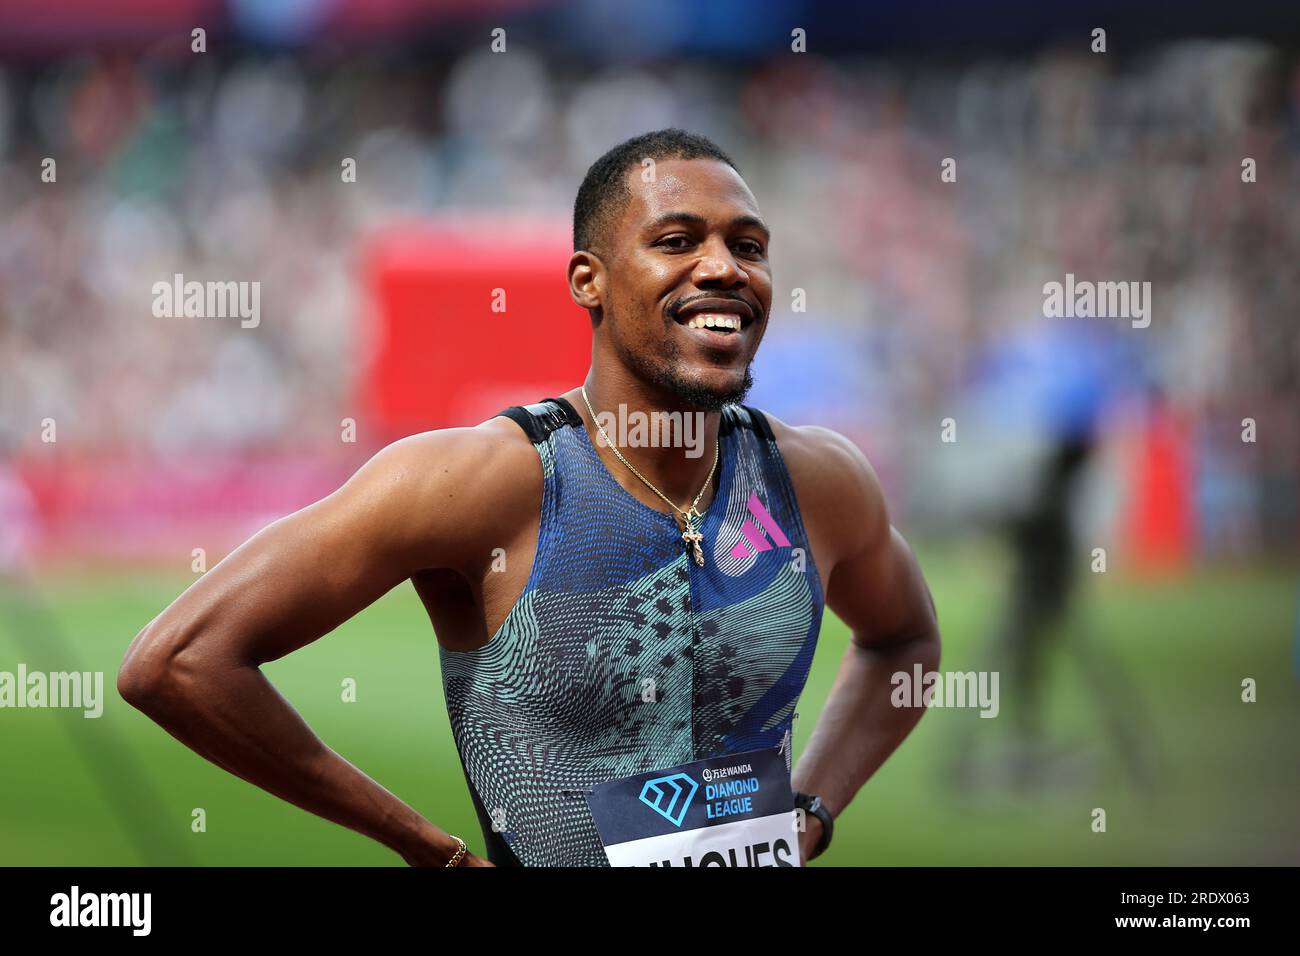 London, UK. 23rd July 23. Zharnel HUGHES (Great Britain) after setting a new National Record in the Men's 200m Final at the 2023, IAAF Diamond League, Queen Elizabeth Olympic Park, Stratford, London, UK. Credit: Simon Balson/Alamy Live News Stock Photo